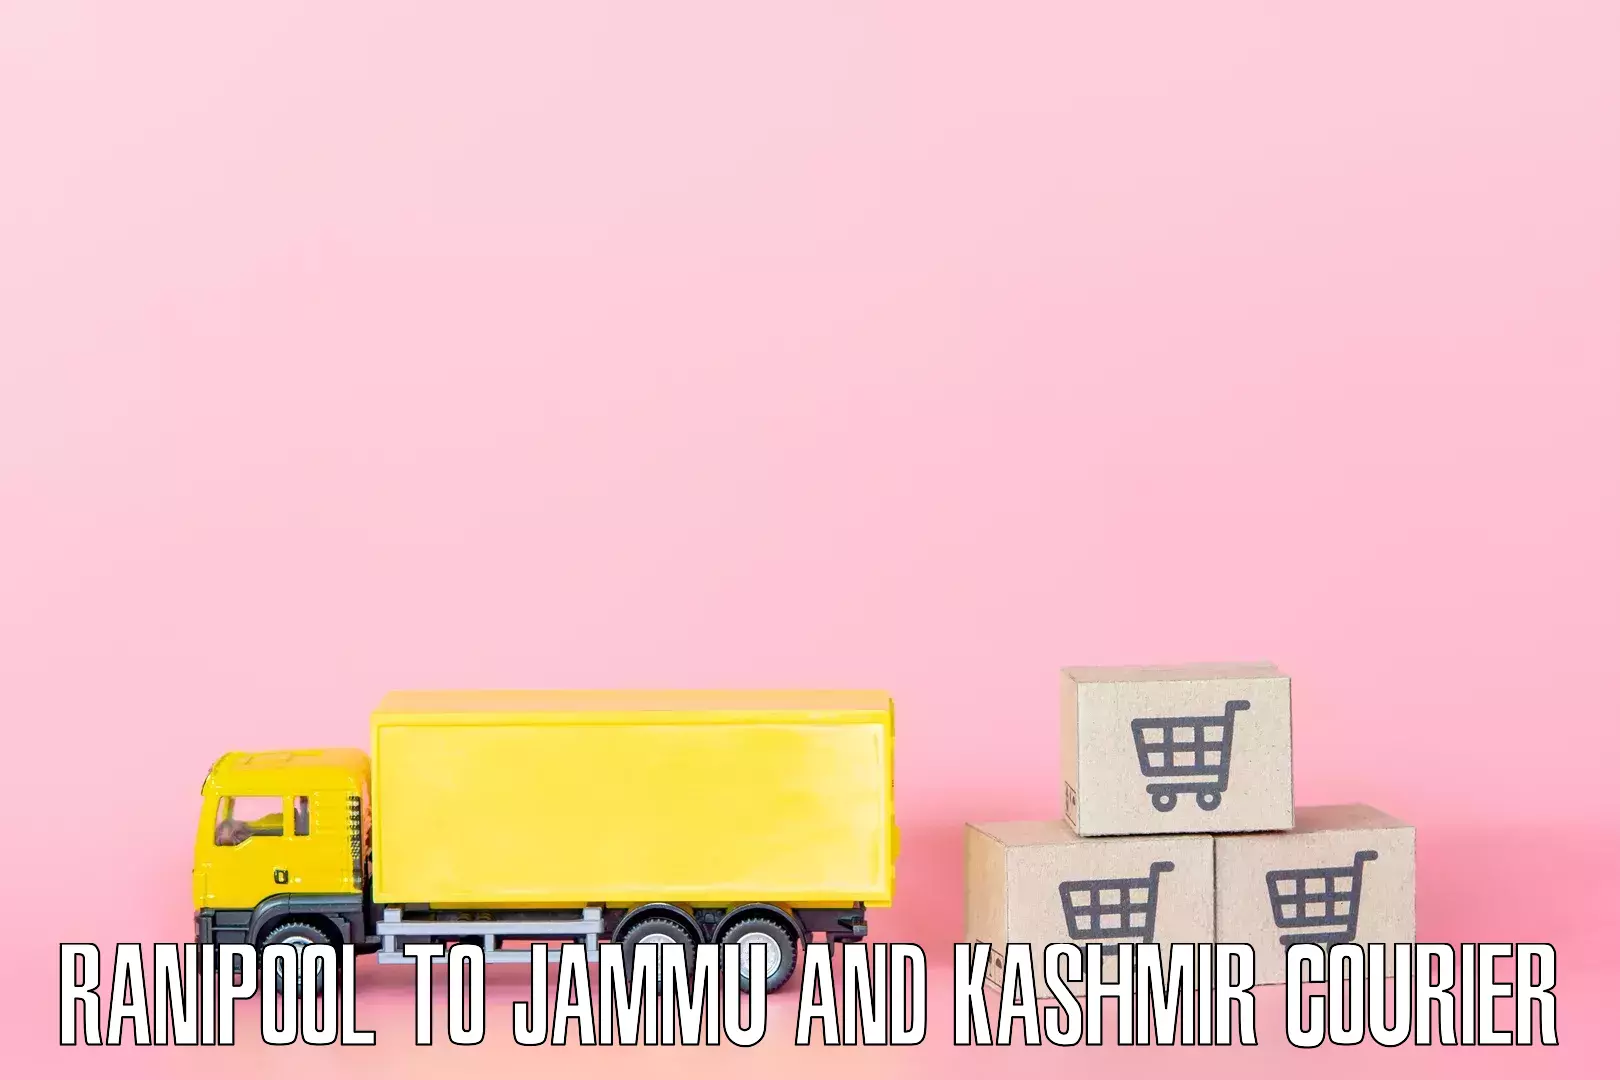 Hassle-free relocation Ranipool to Jammu and Kashmir